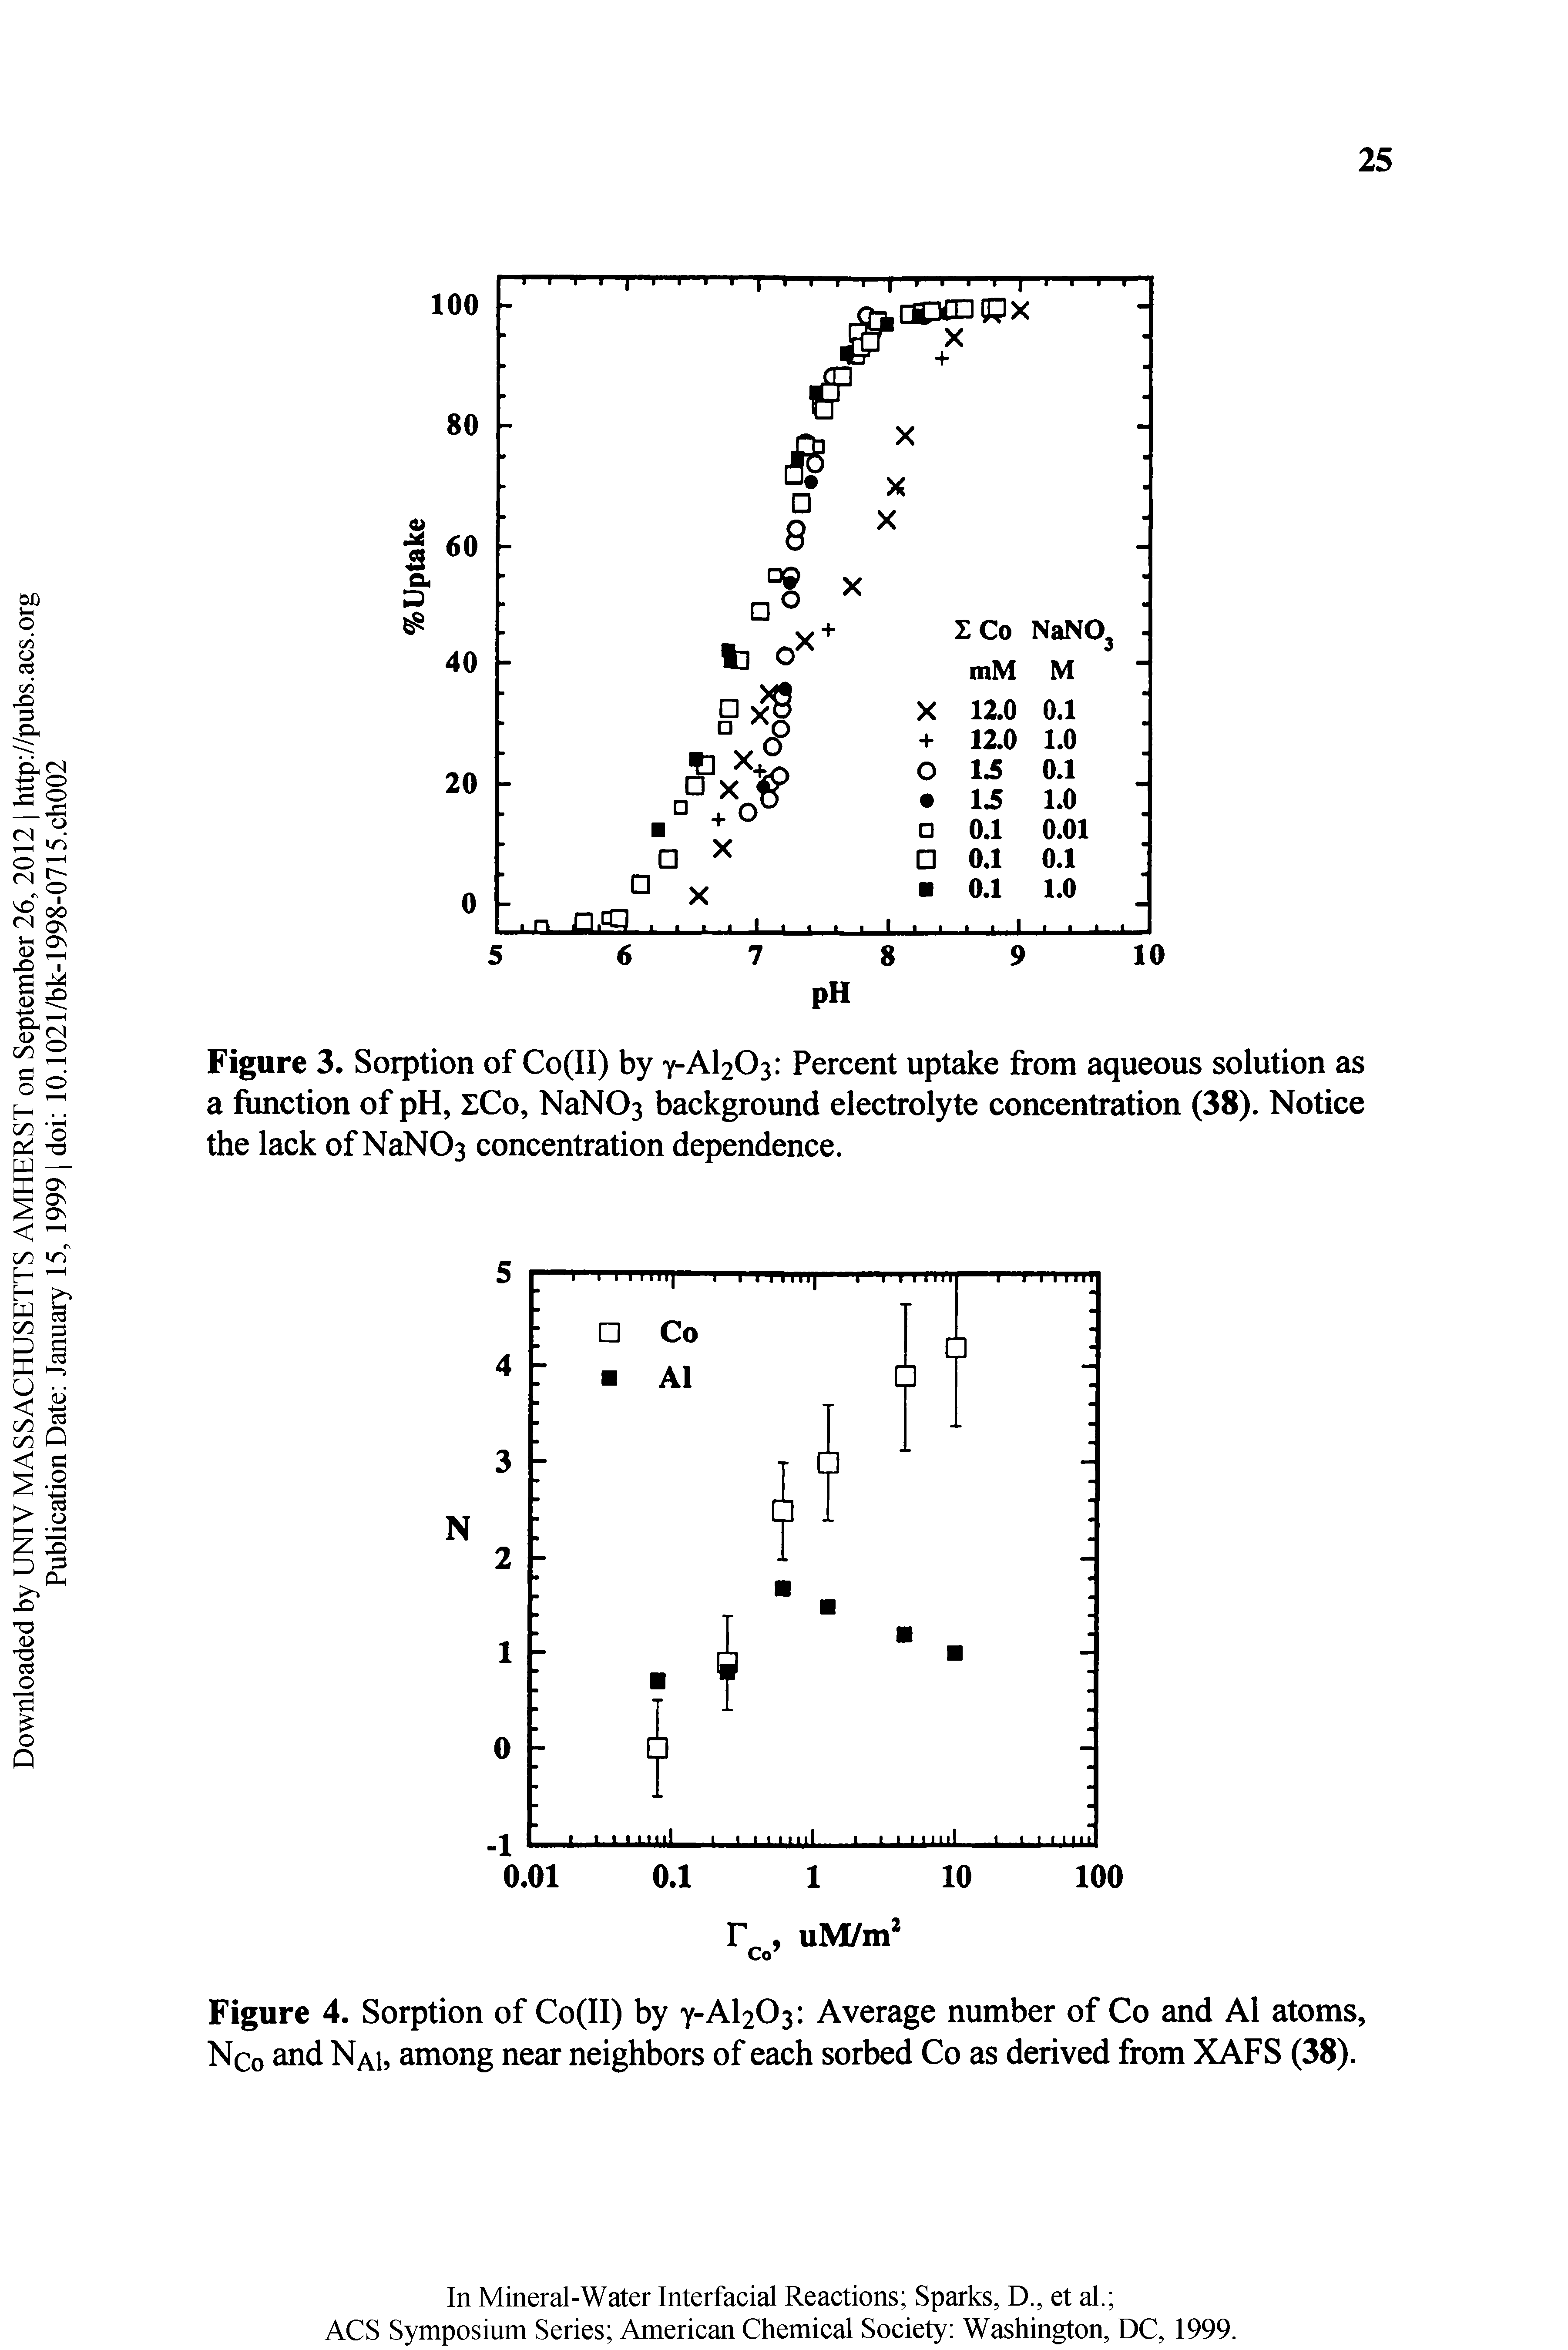 Figure 3. Sorption of Co(II) by Y-AI2O3 Percent uptake from aqueous solution as a function of pH, zCo, NaNOs background electrolyte concentration (38). Notice the lack of NaNOa concentration dependence.